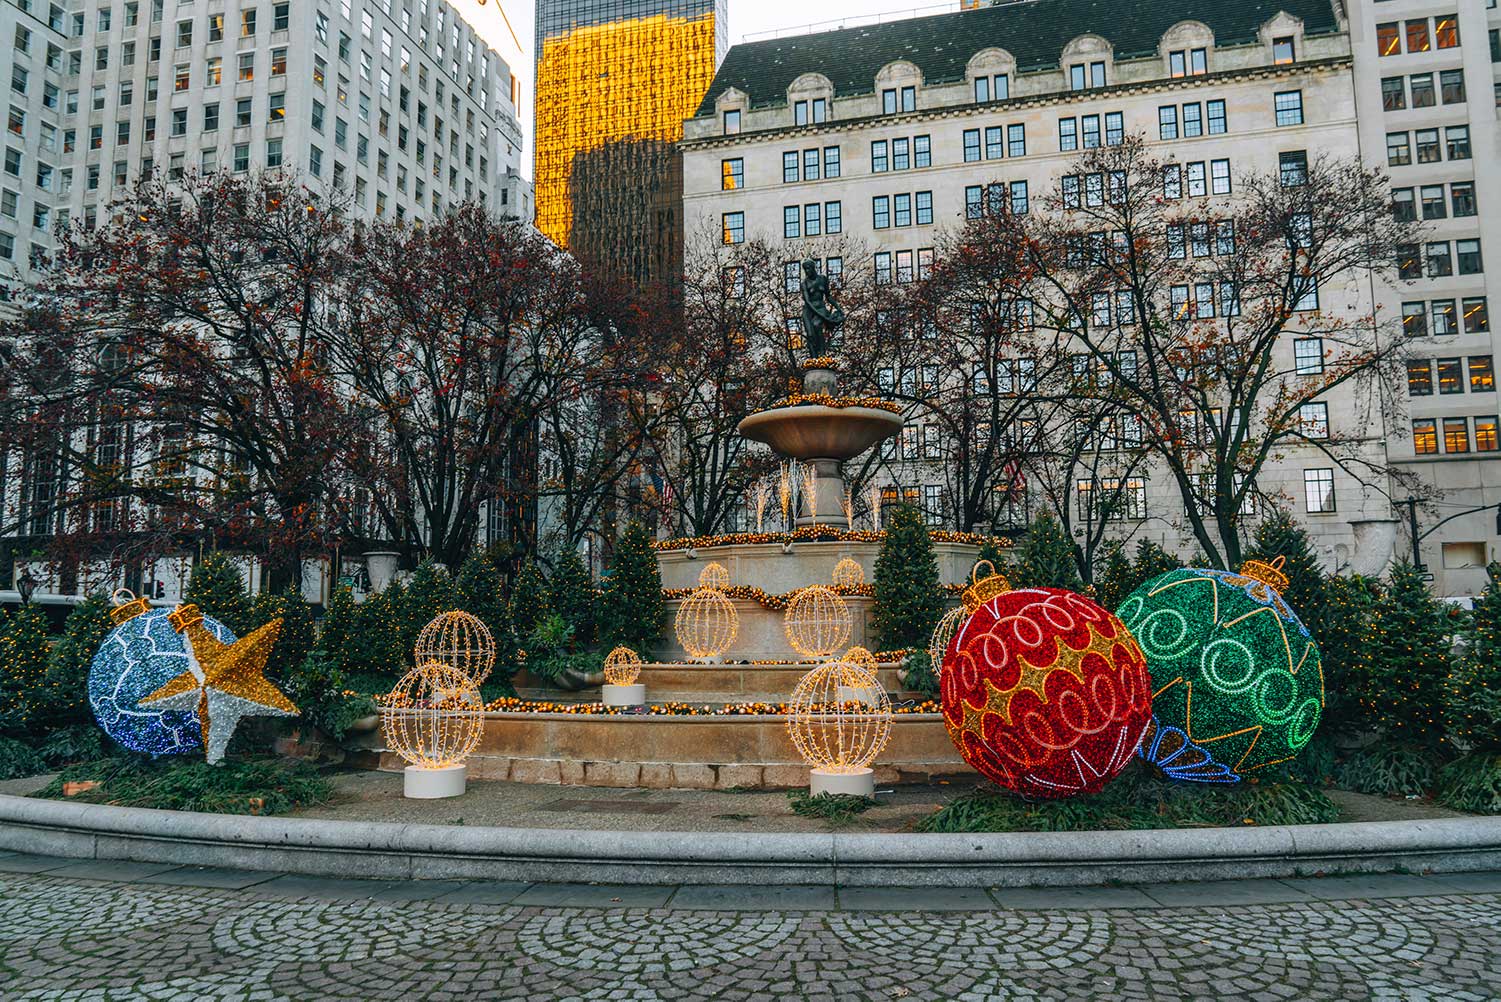 Kristi Hemric (Instagram: @khemric) shares a photo she took of Christmas time at the World Famous Plaza Hotel in NYC